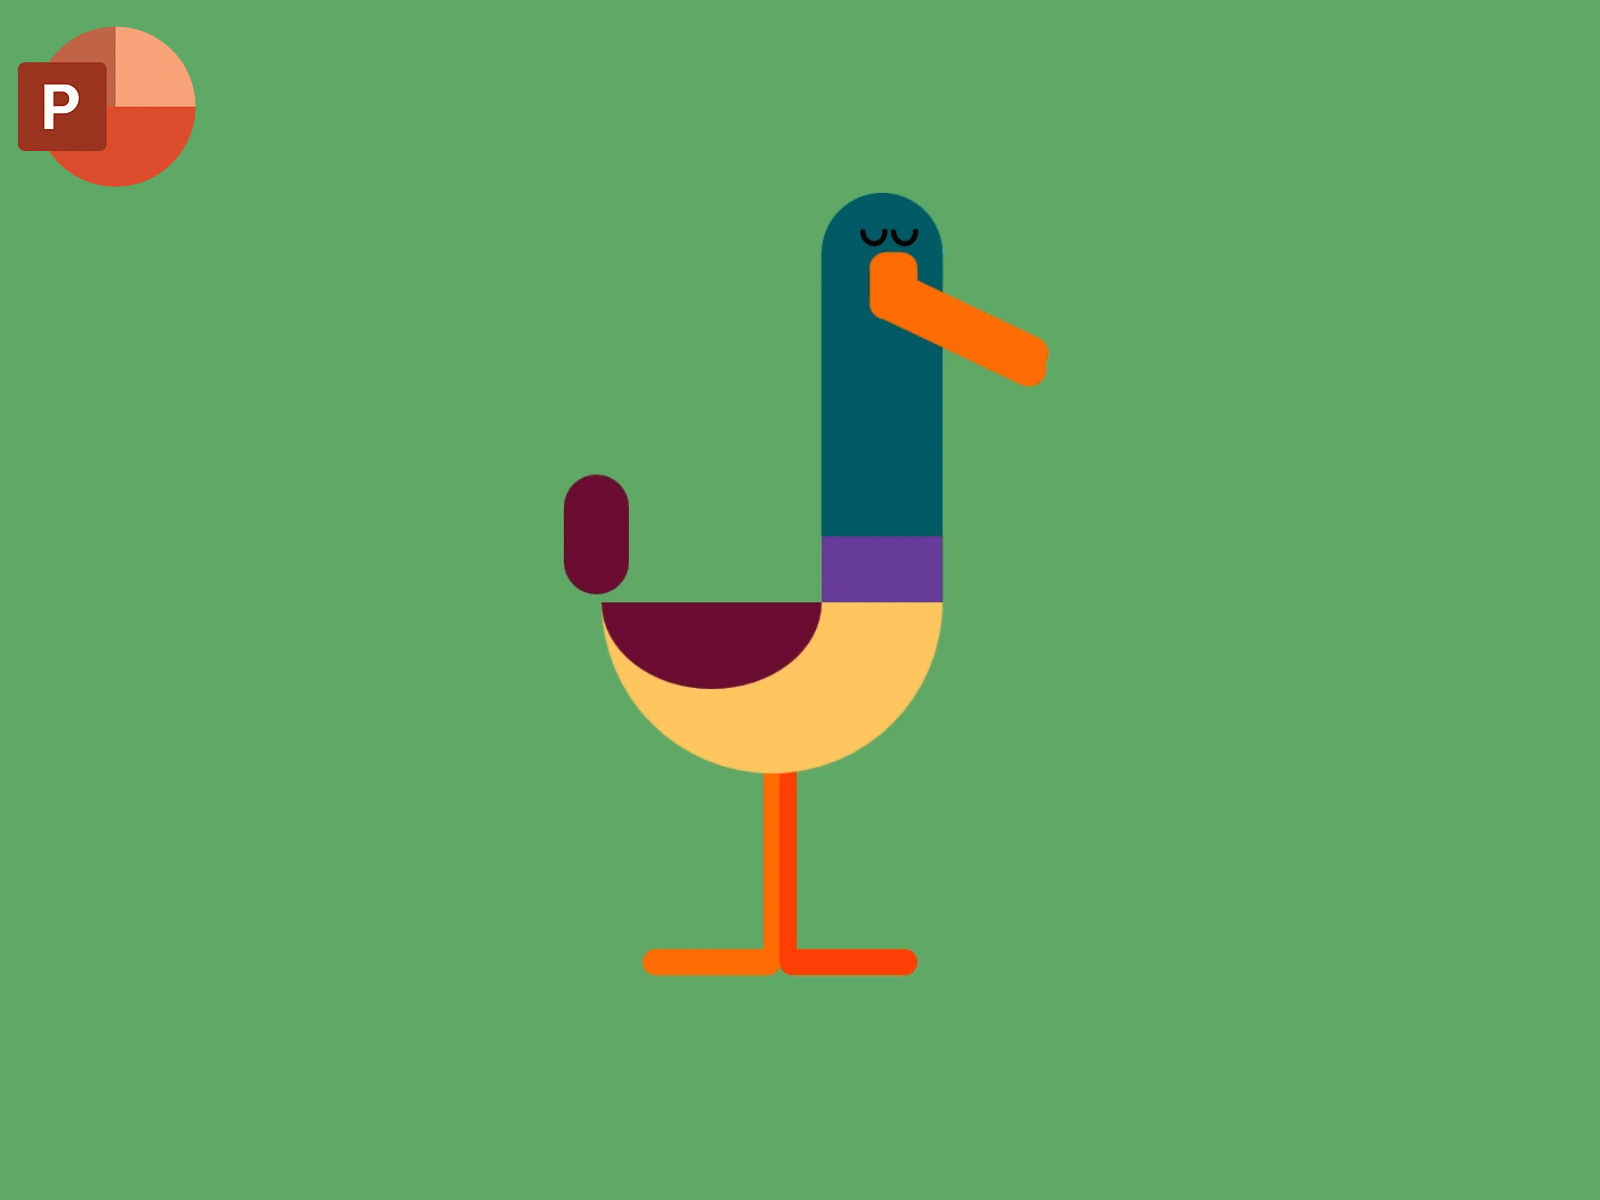 Duck Animation in PowerPoint Tutorial by The Teacher on Dribbble